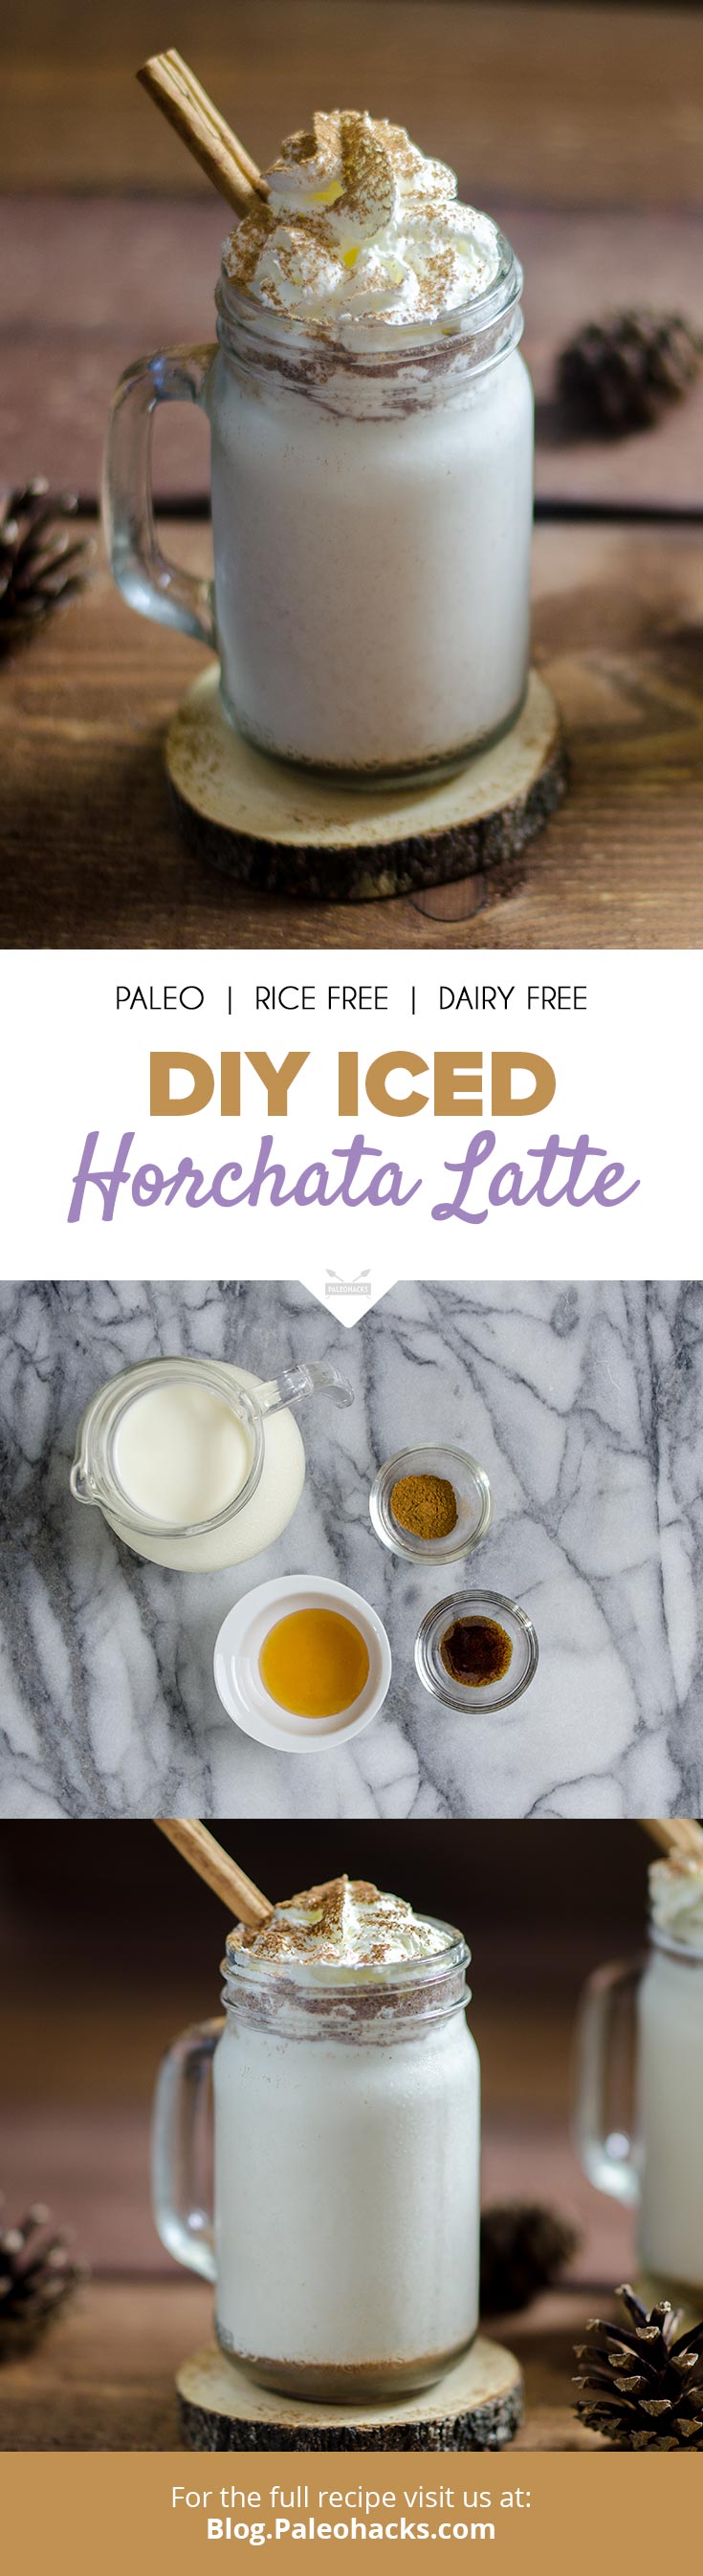 Sip on the cozy flavors of cinnamon and vanilla with homemade horchata latte. This coffee twist on horchata is easy, fuss-free and ready in under 5 minutes.